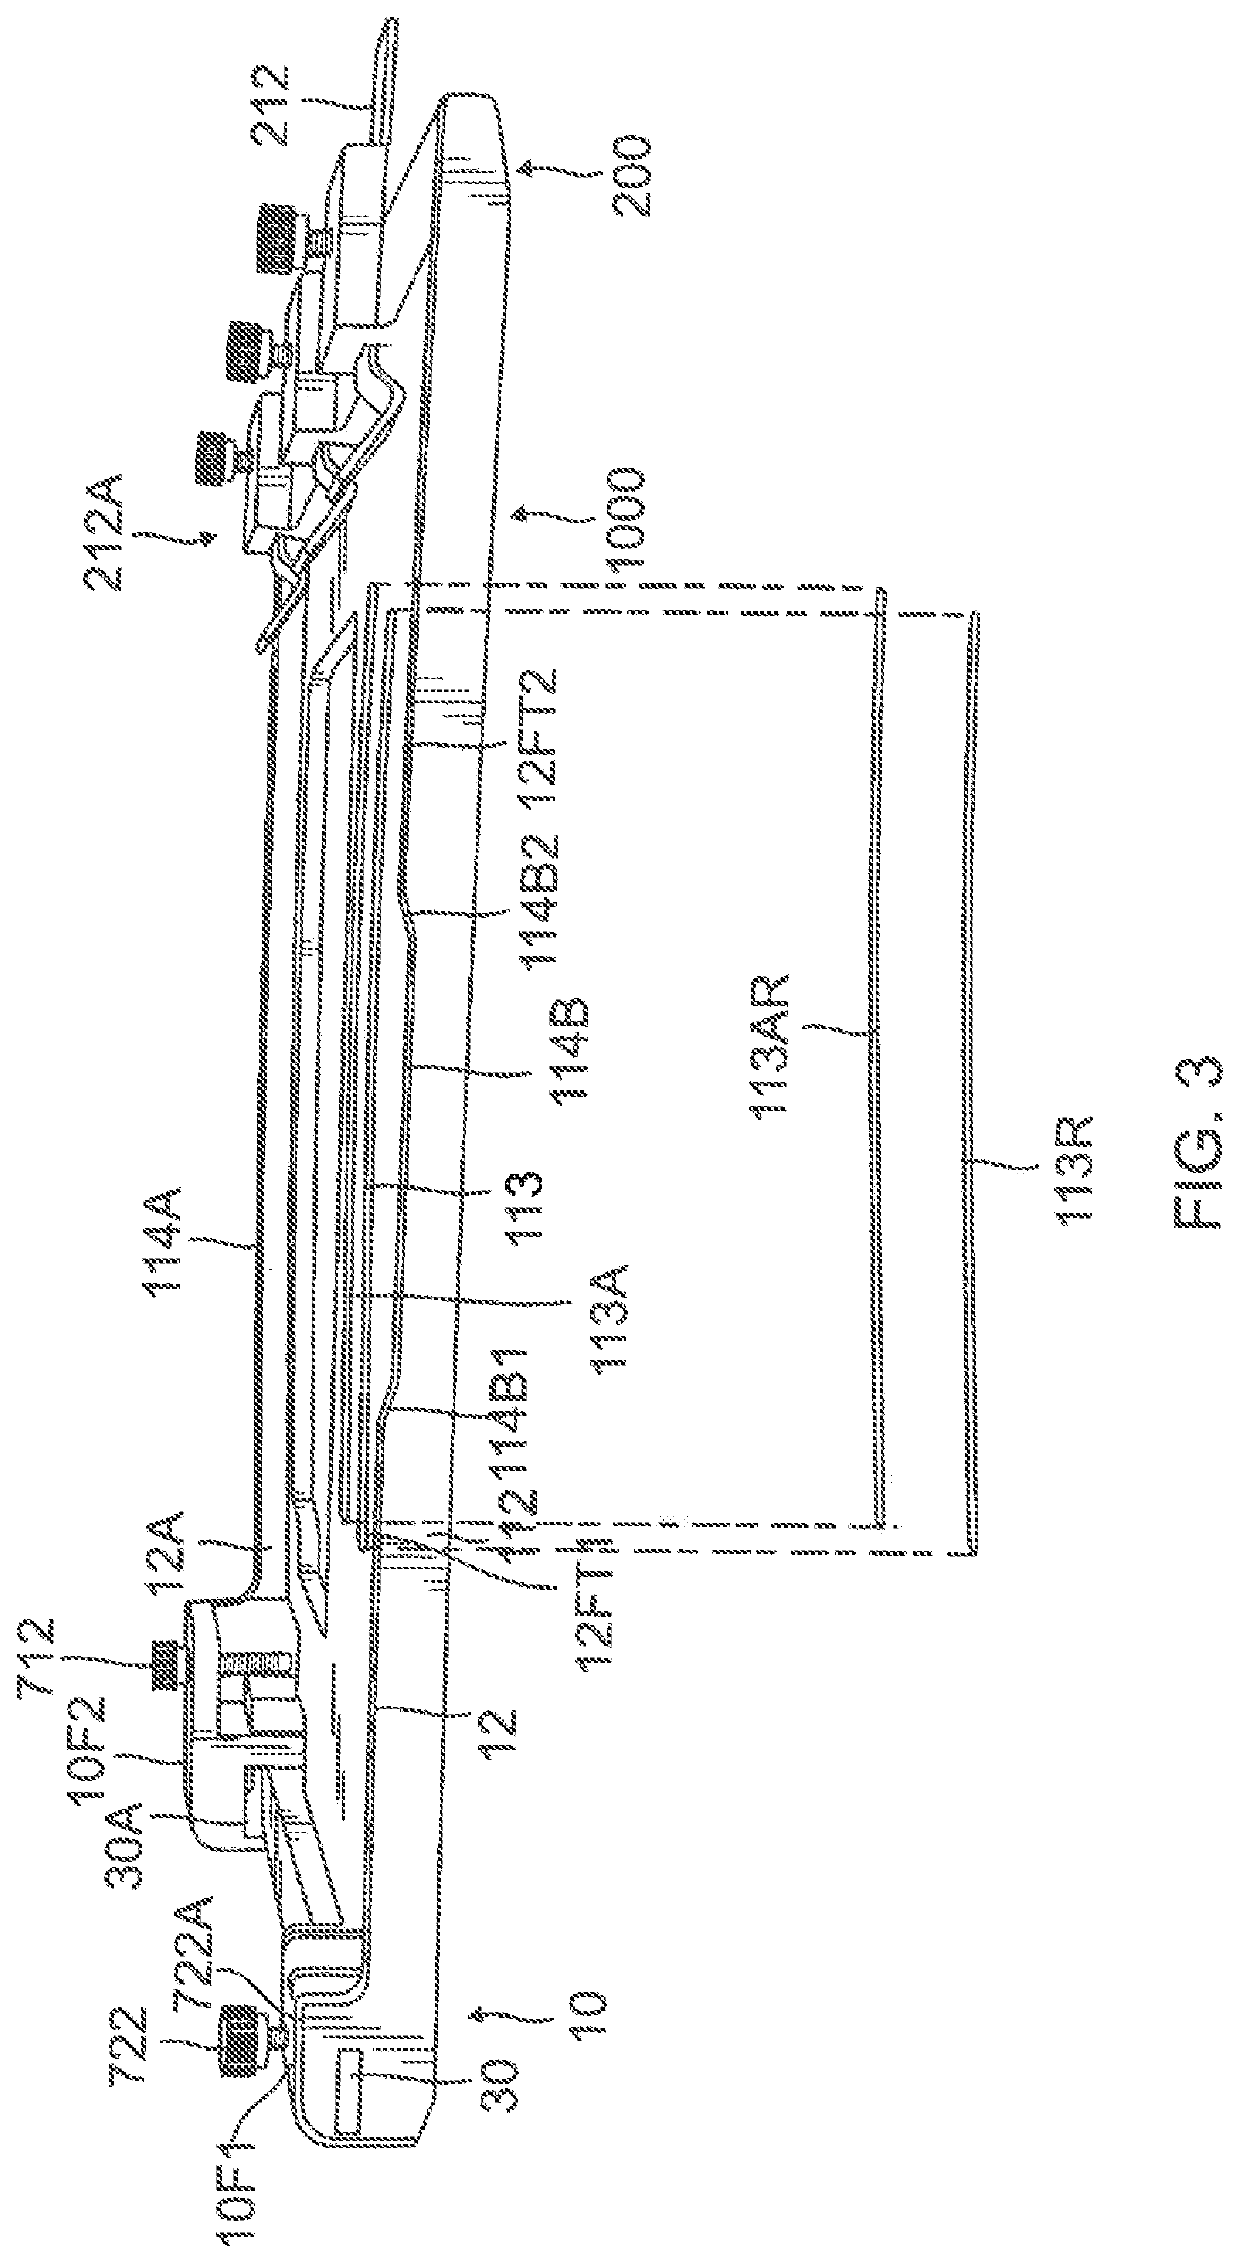 Rolling plate assembly attachment for portable power cutting tools including an improved structural design, improved wheel configuration, and a cutting guide